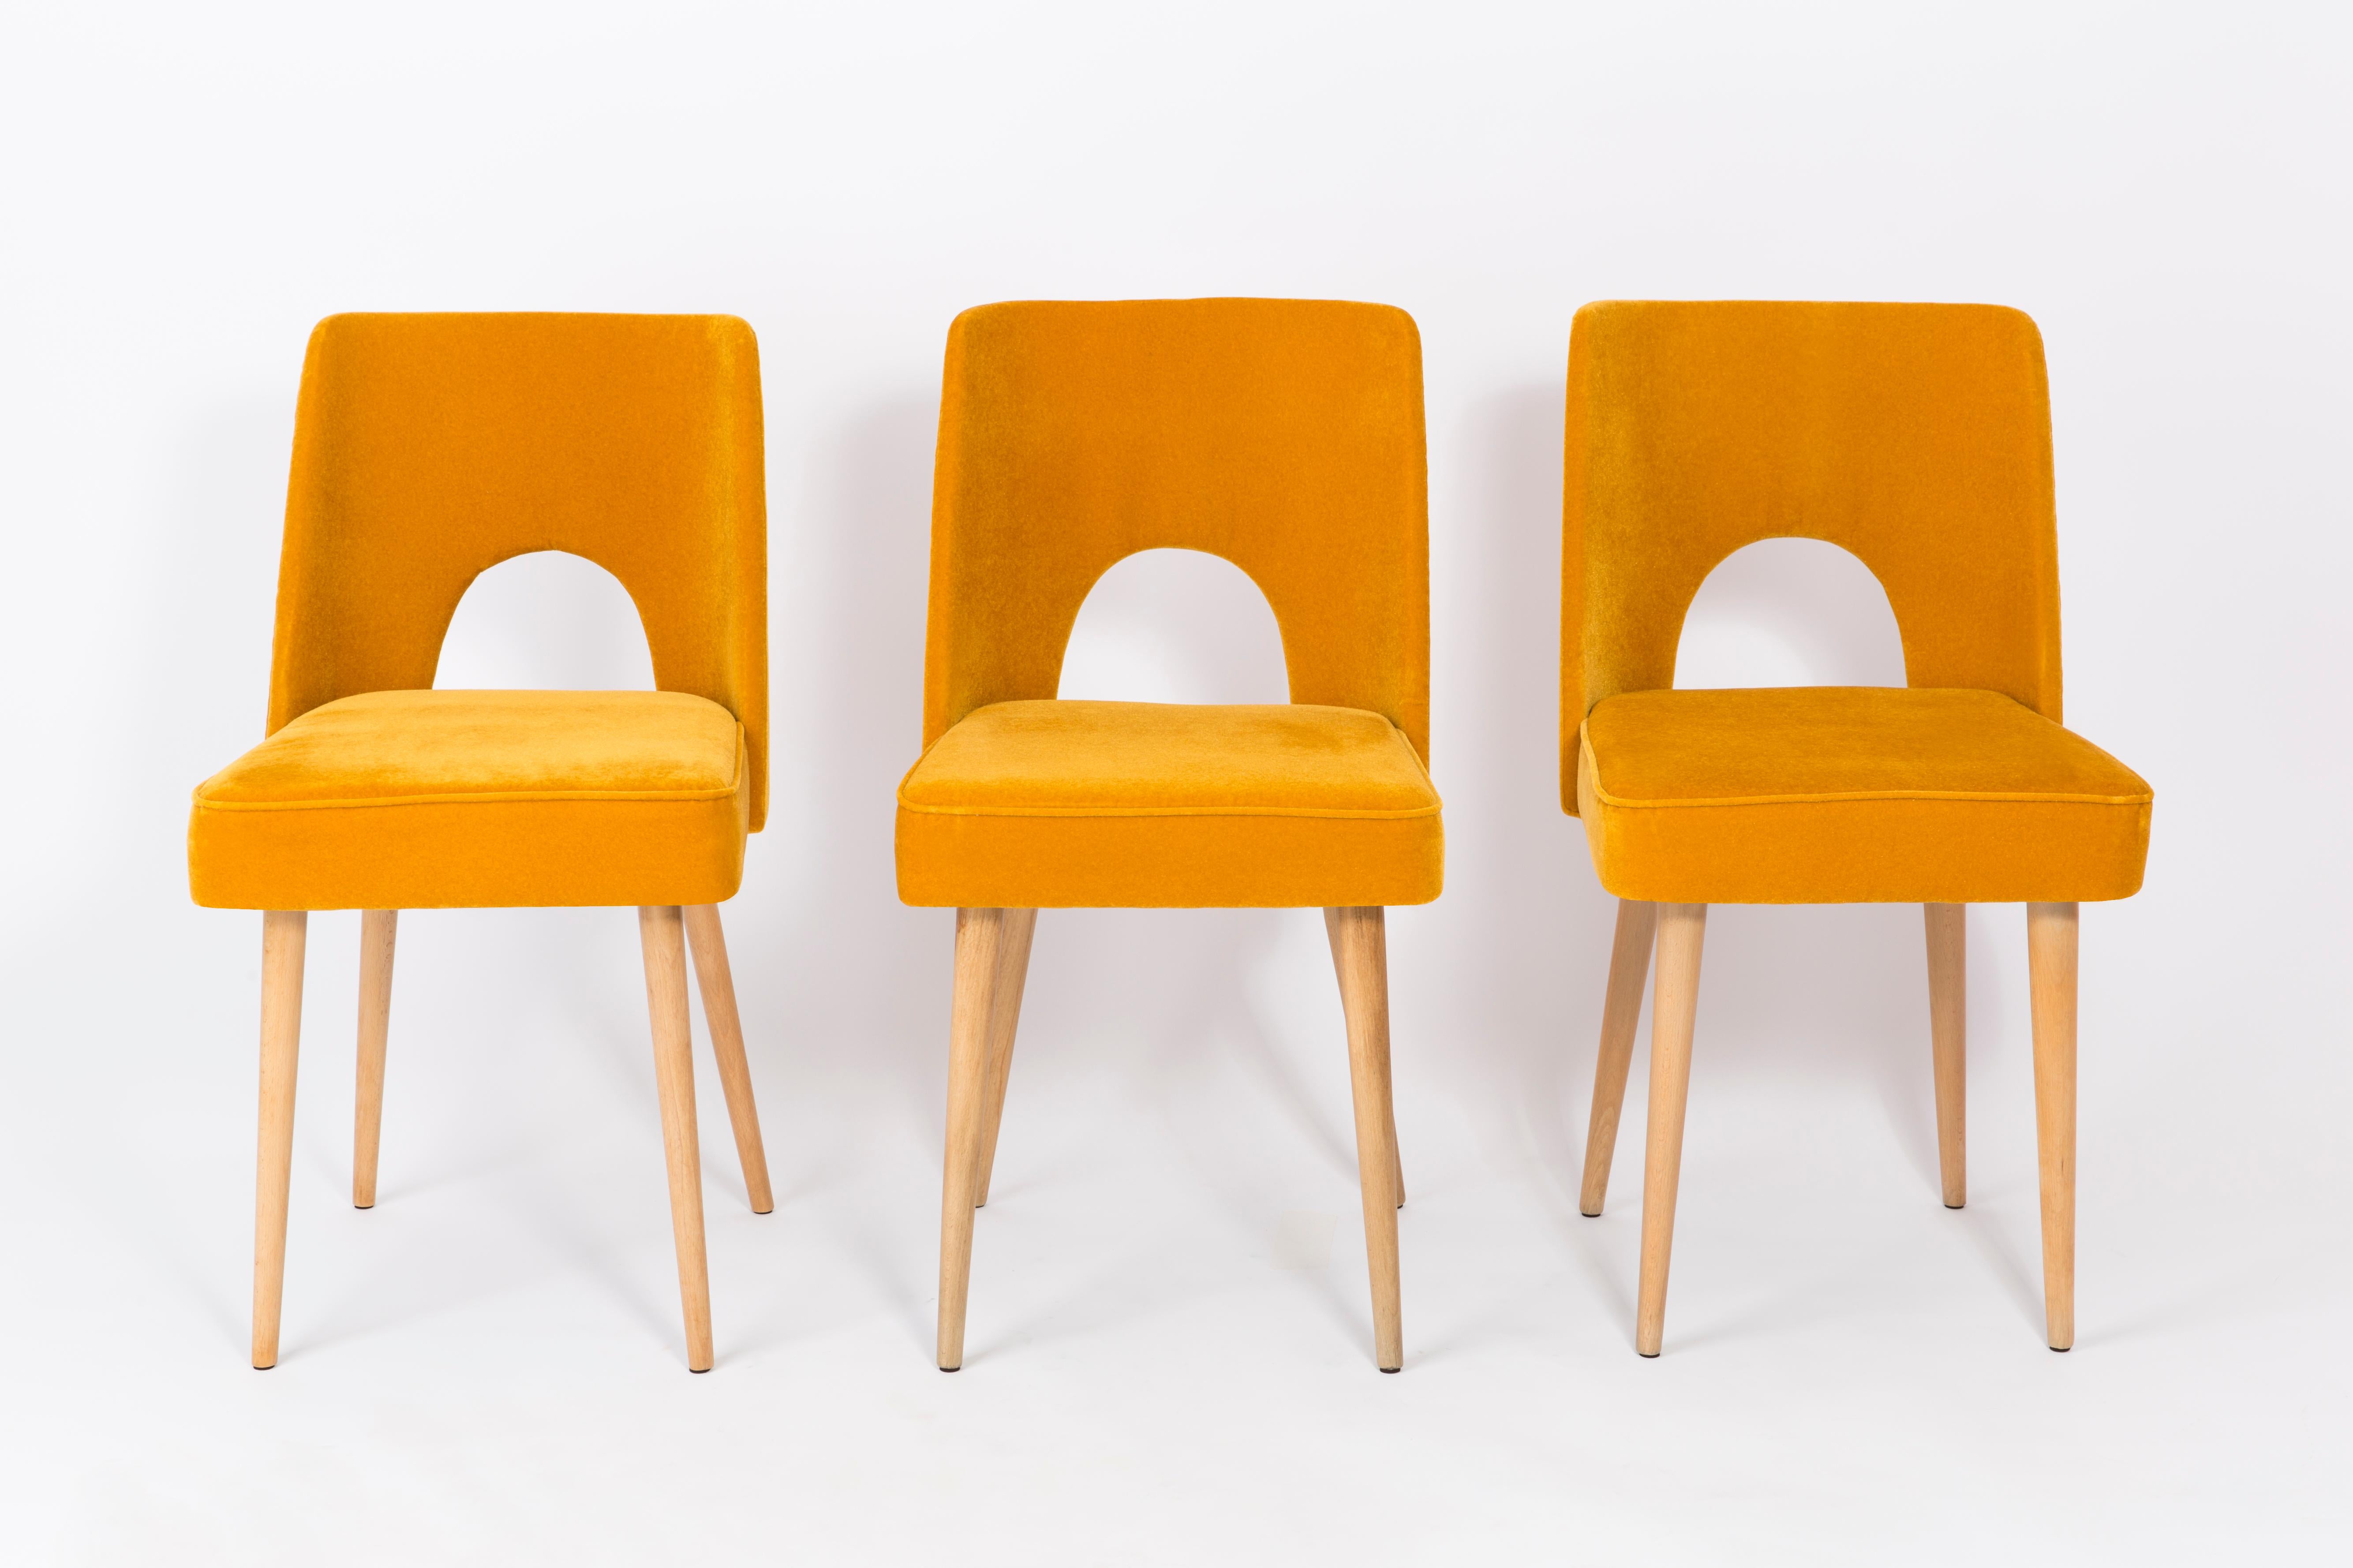 Four beautiful chairs type 1020 colloquially called 